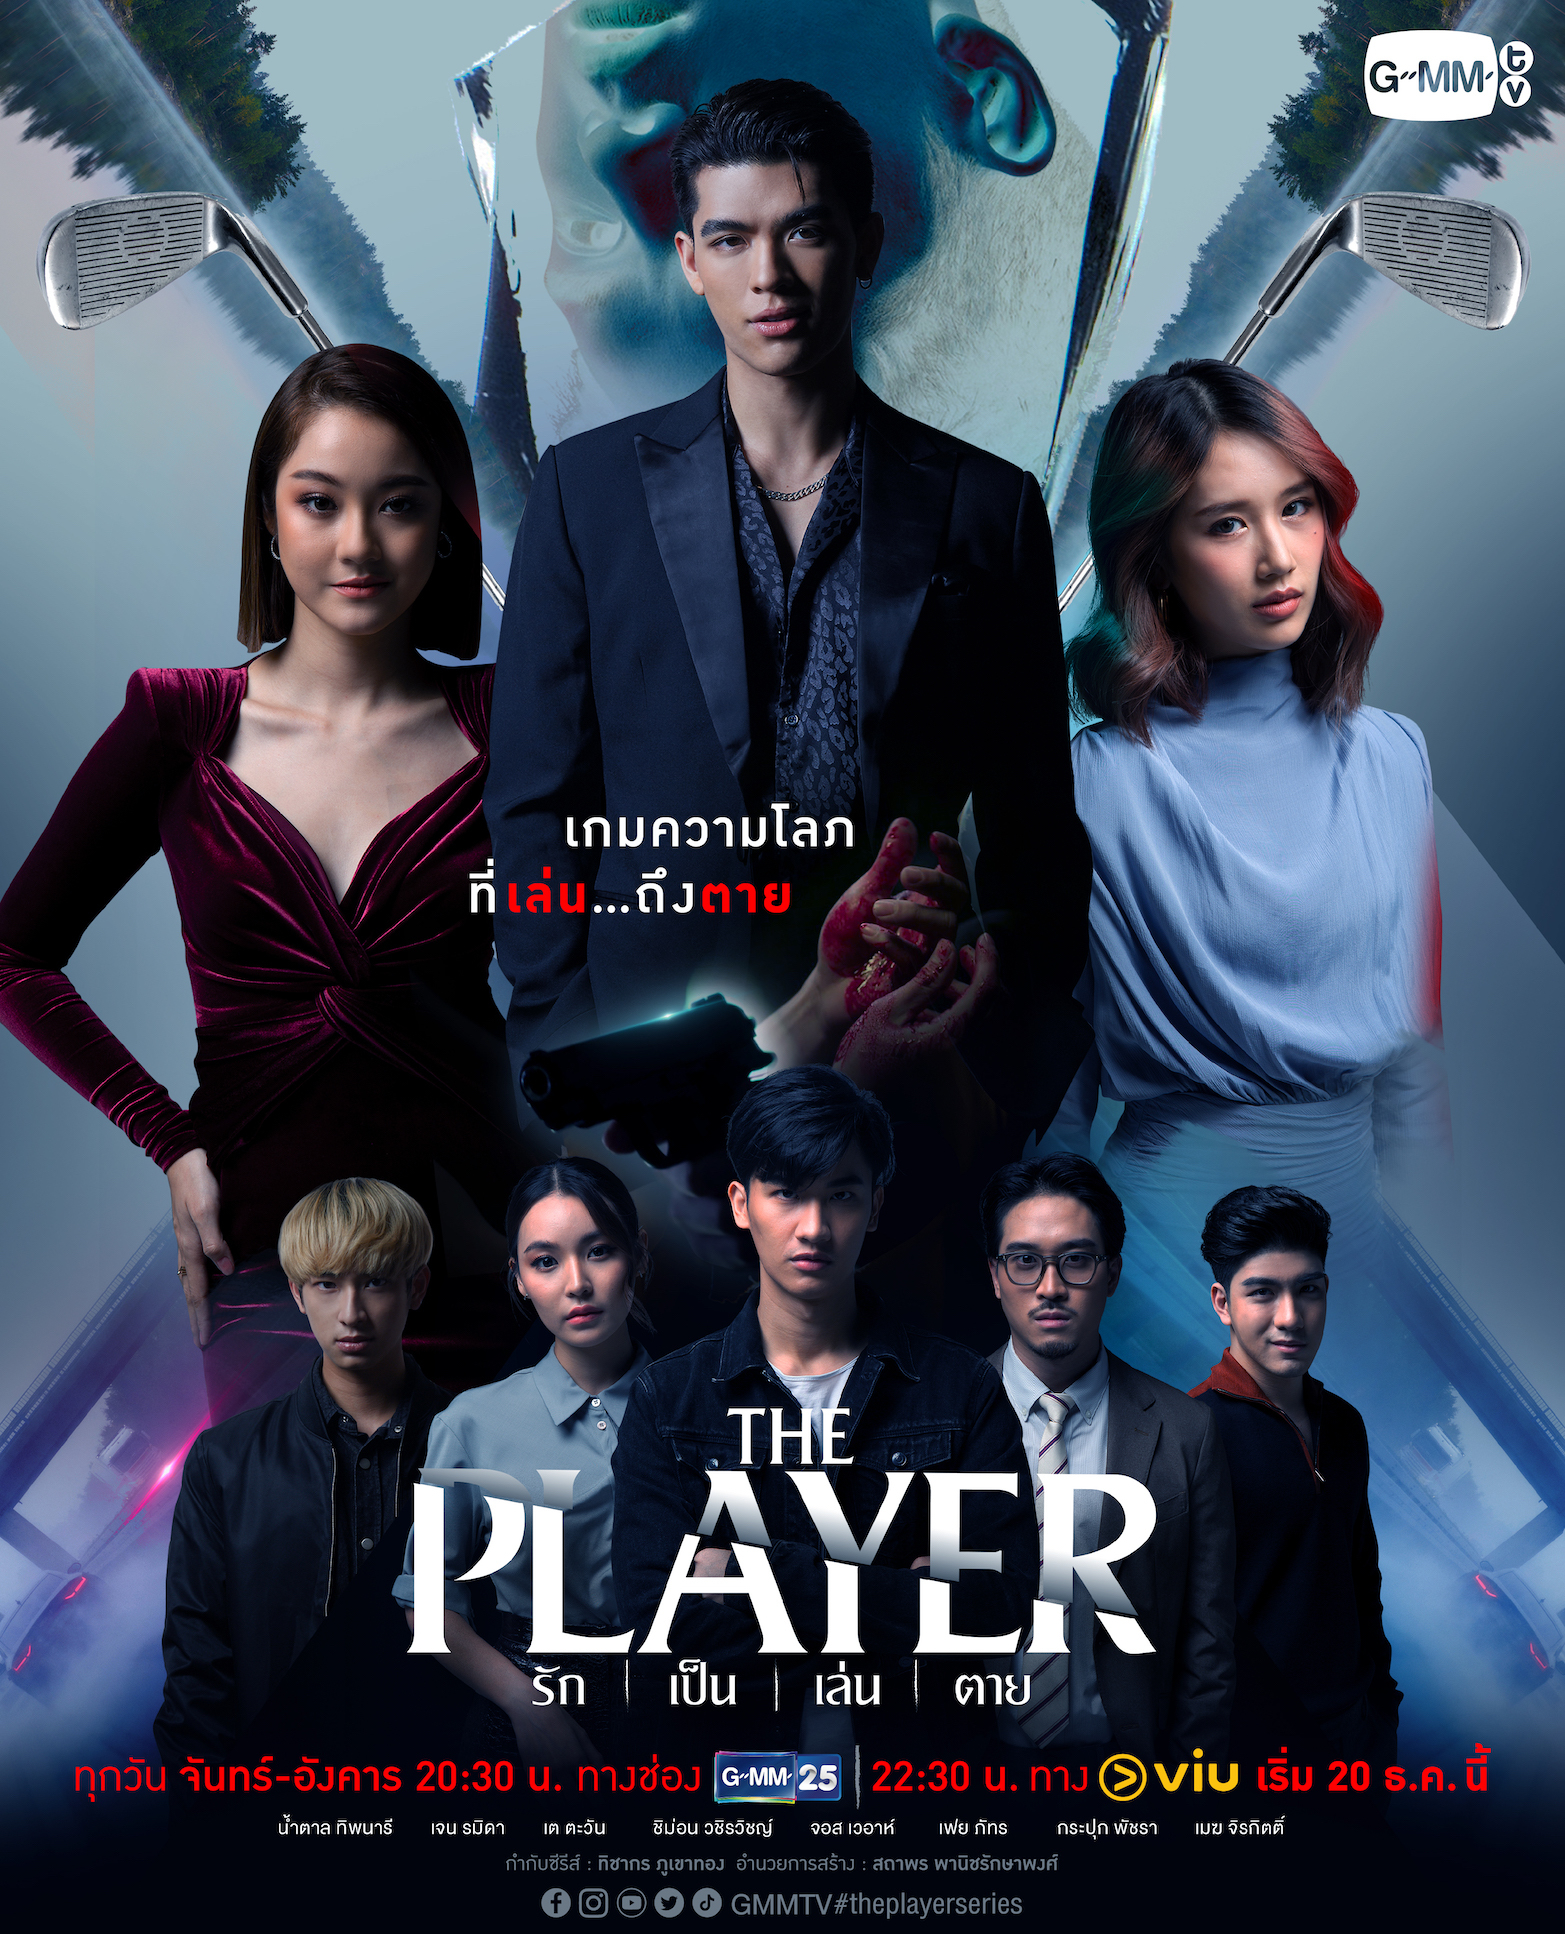 『THE PLAYER』 (c)GMMTV